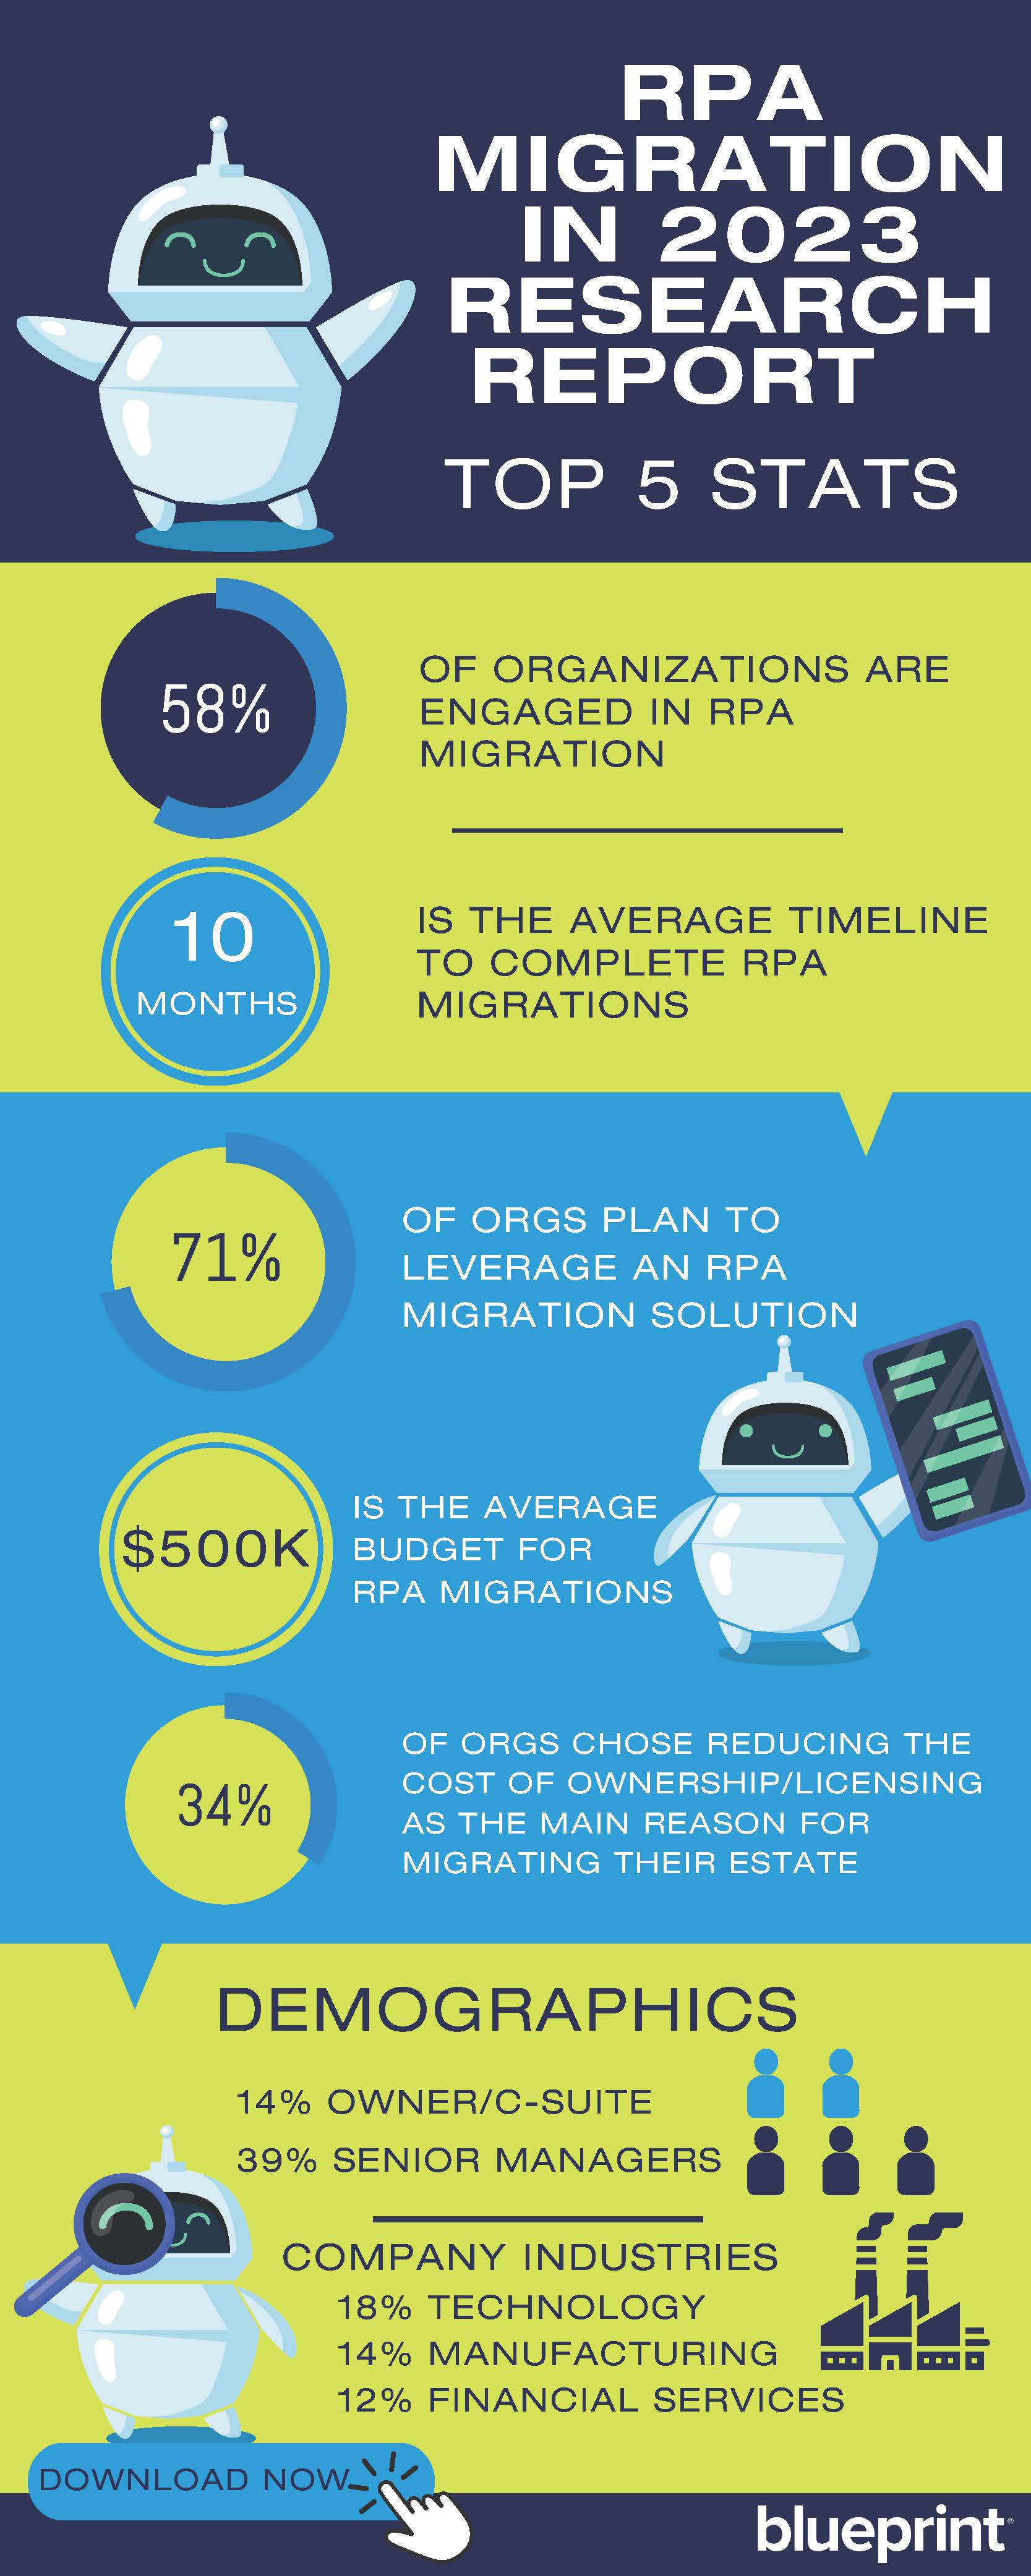 INFOGRAPHIC: RPA Migrations in 2023 Research Report - Top 5 Stats